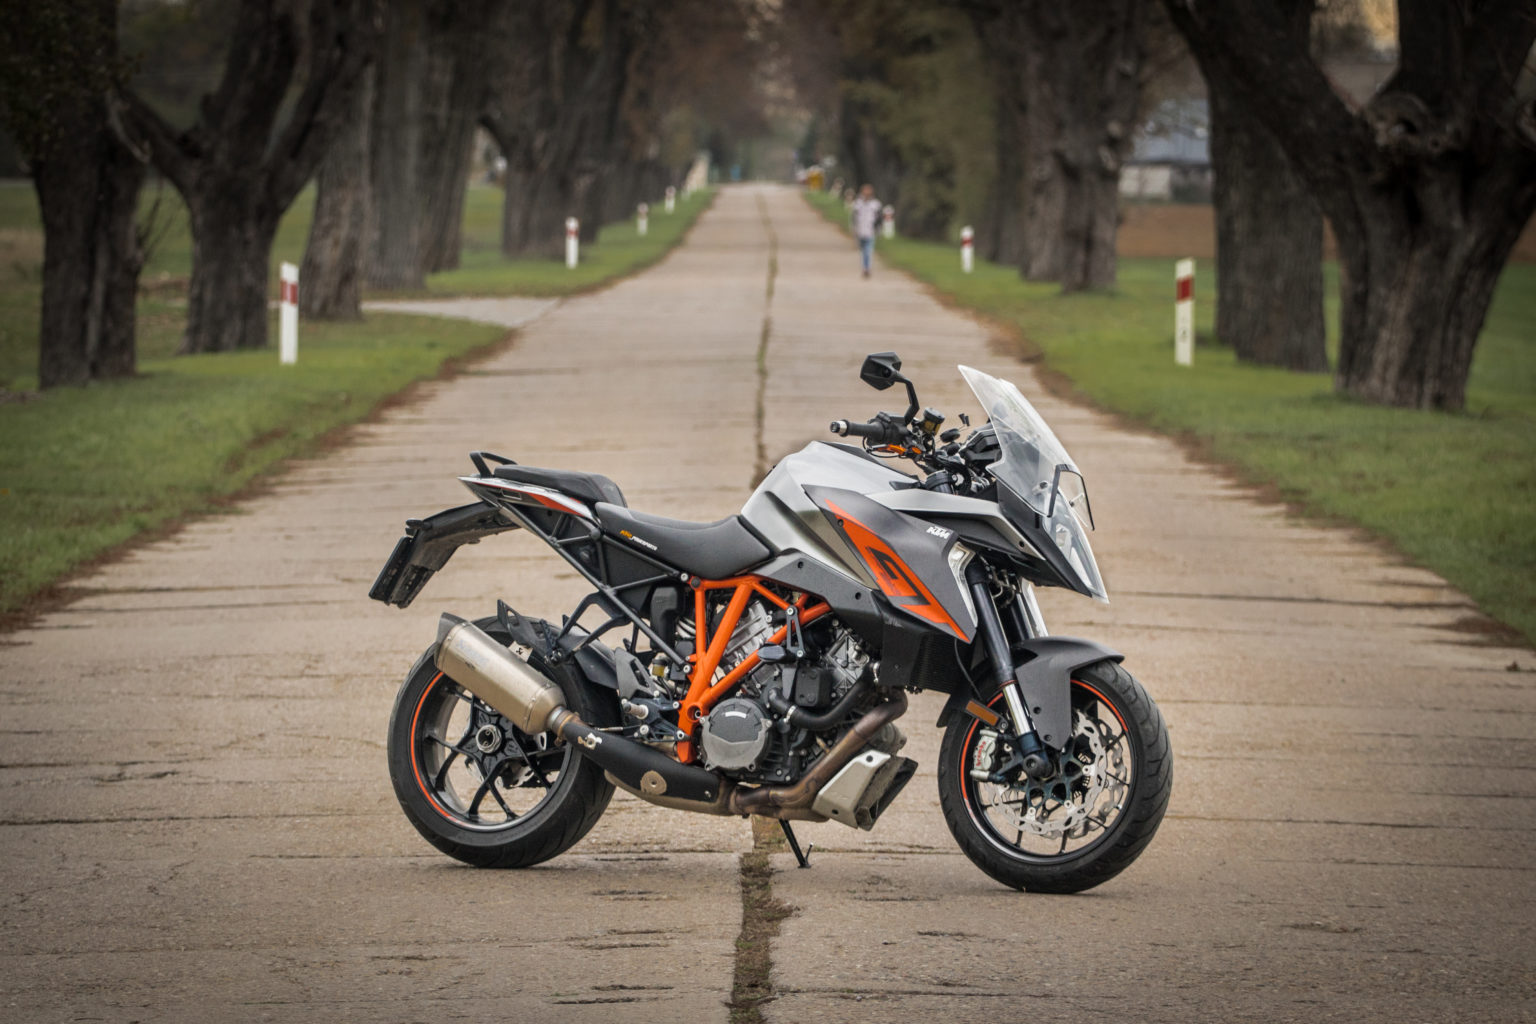 KTM 1290 Super Duke GT... Is this the motorcycle I need?